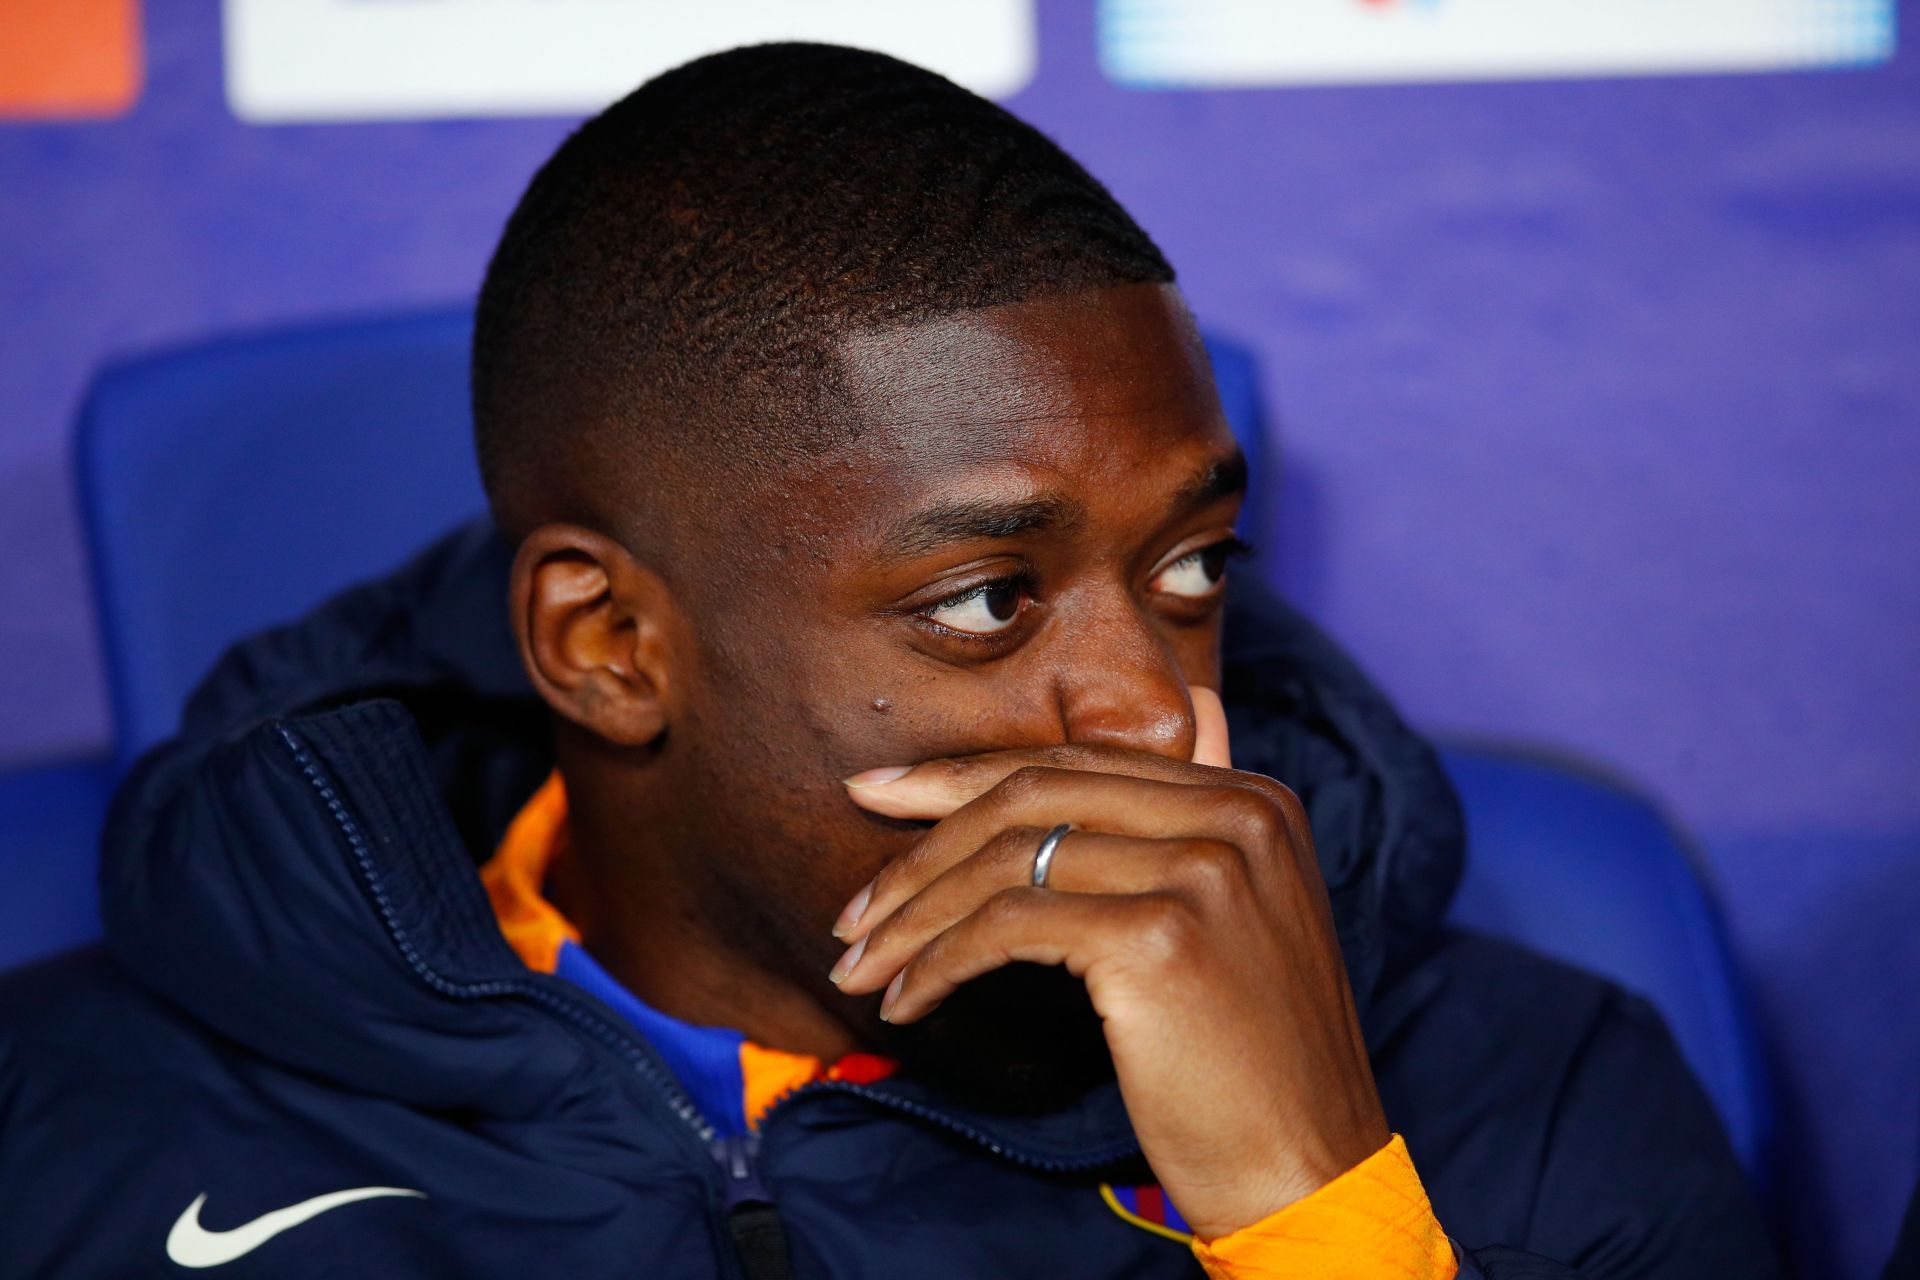 Ousmane Dembele is likely to leave Barcelona this summer.